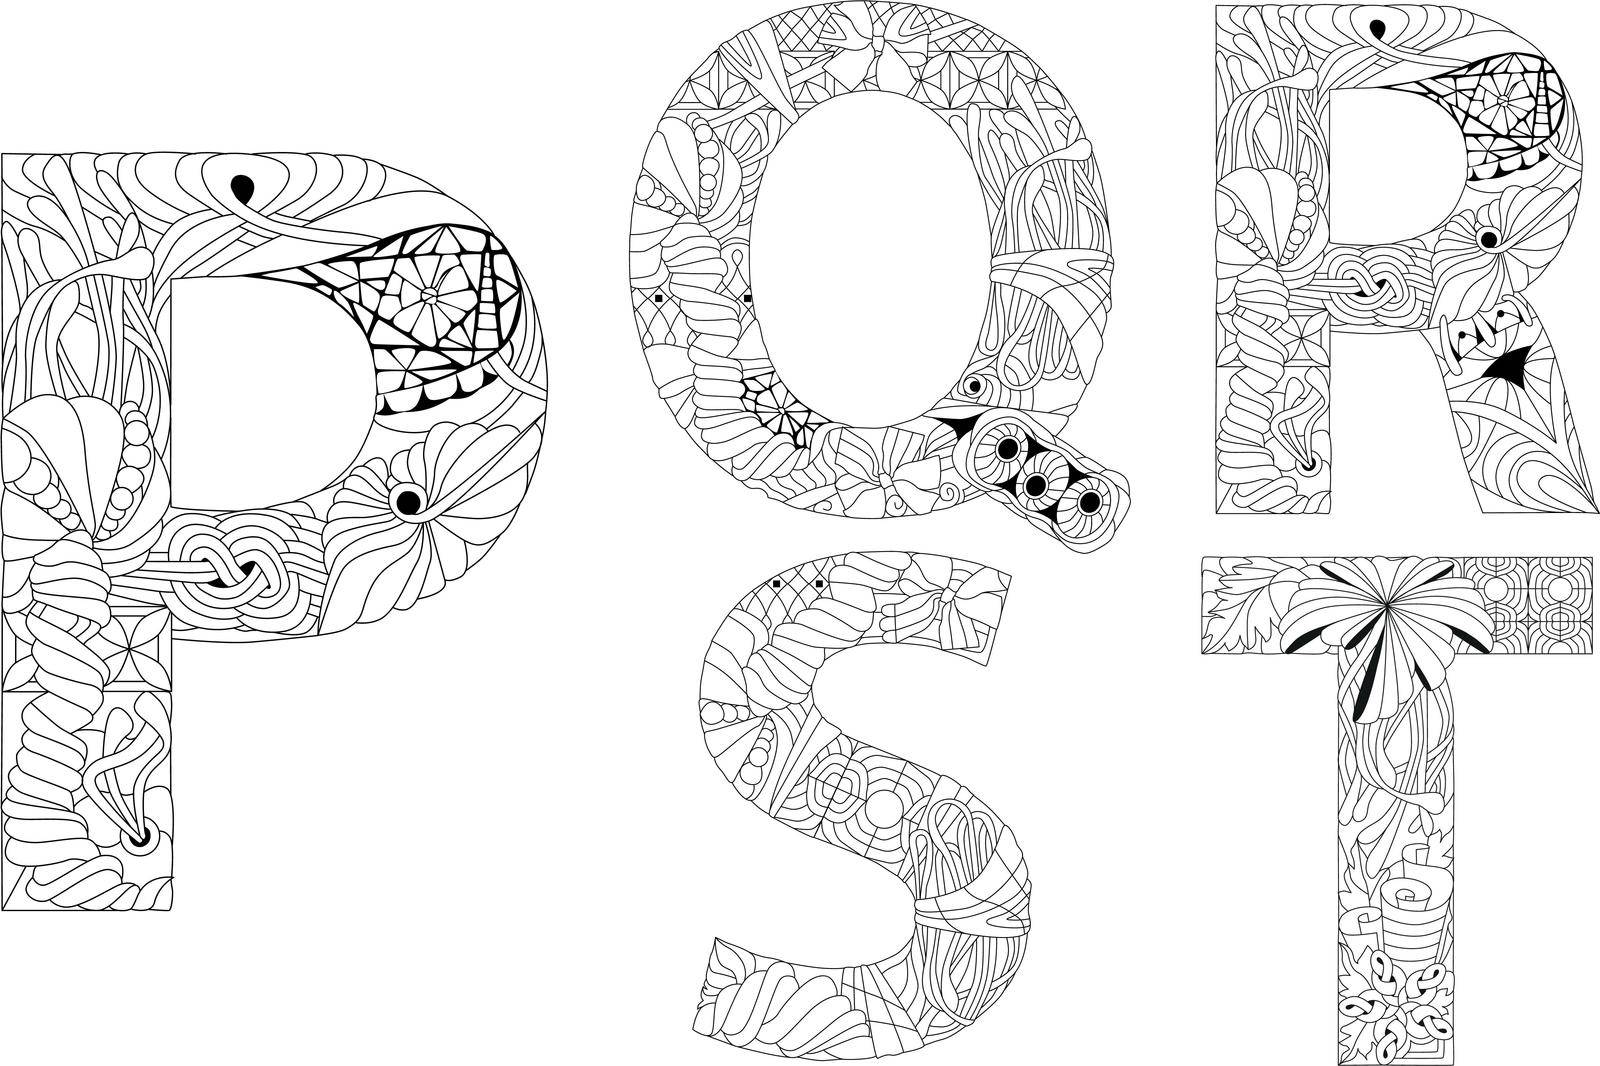 Hand-painted art design. Colorful hand drawn illustration alphabet for coloring pages. Part 4